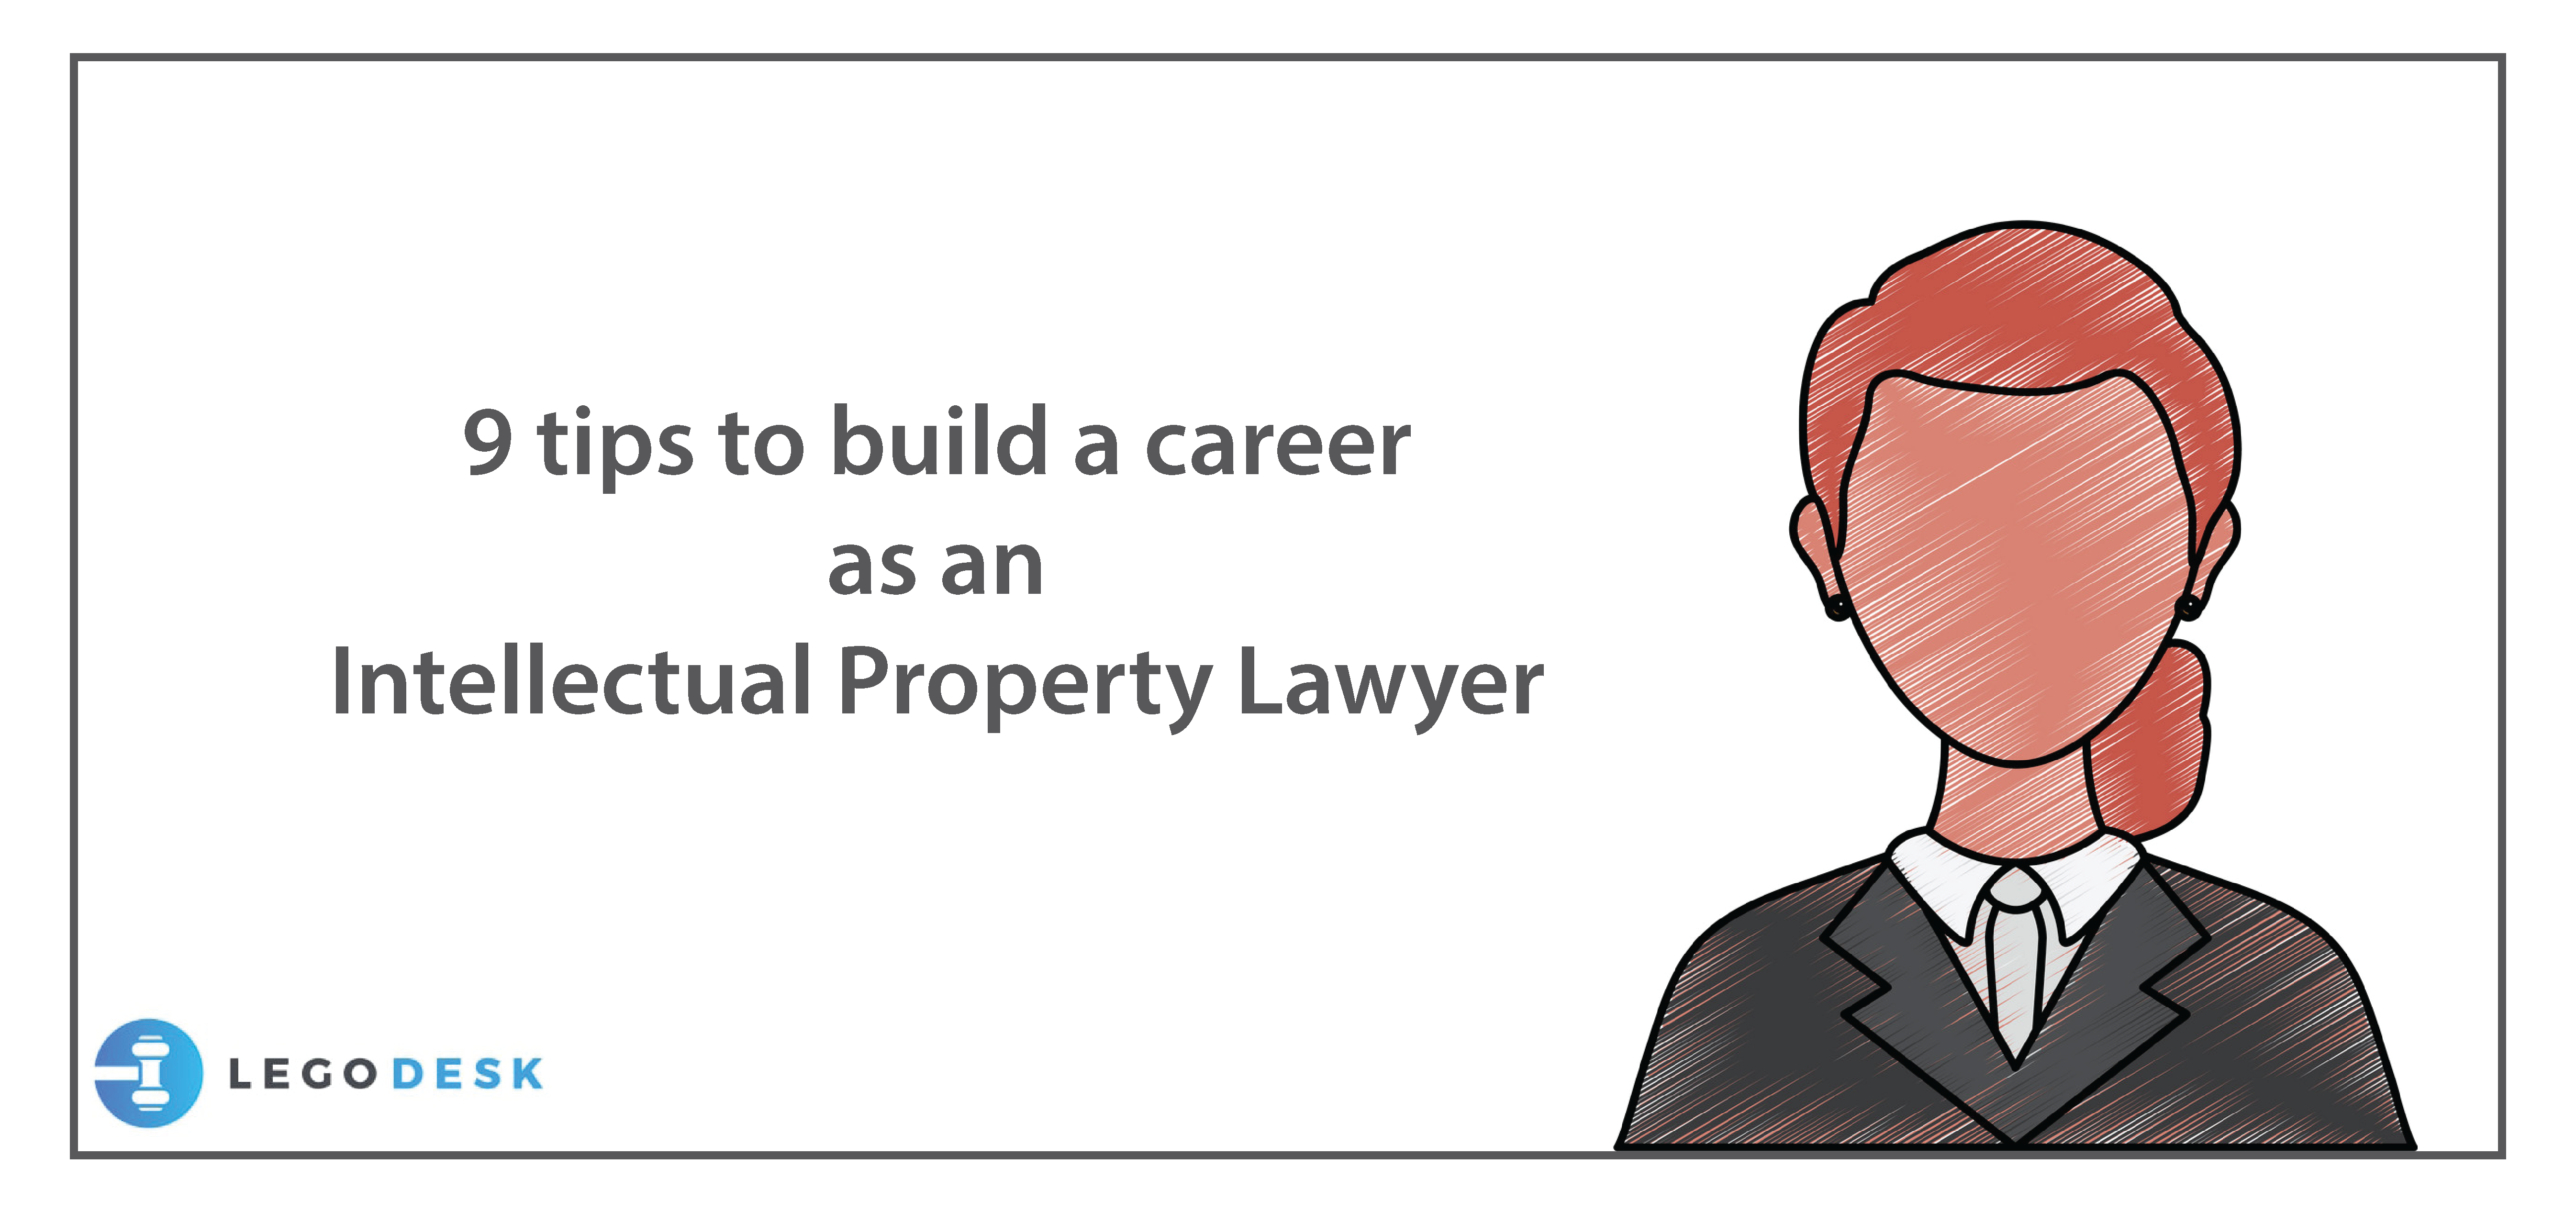 9 tips to build a career as an Intellectual Property Lawyer